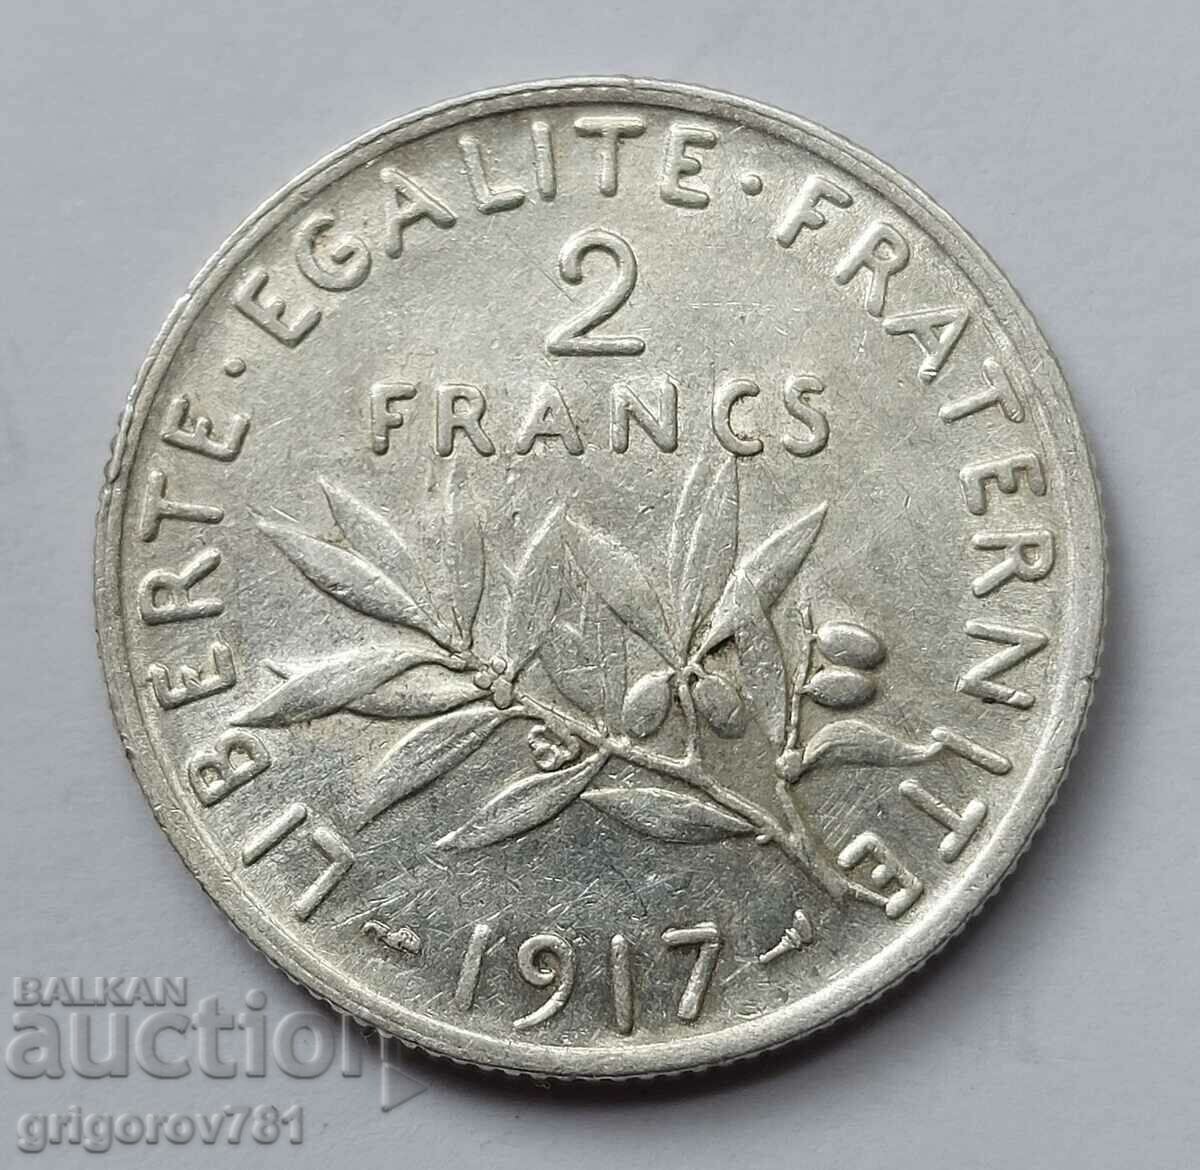 2 Francs Silver France 1917 - Silver Coin #97